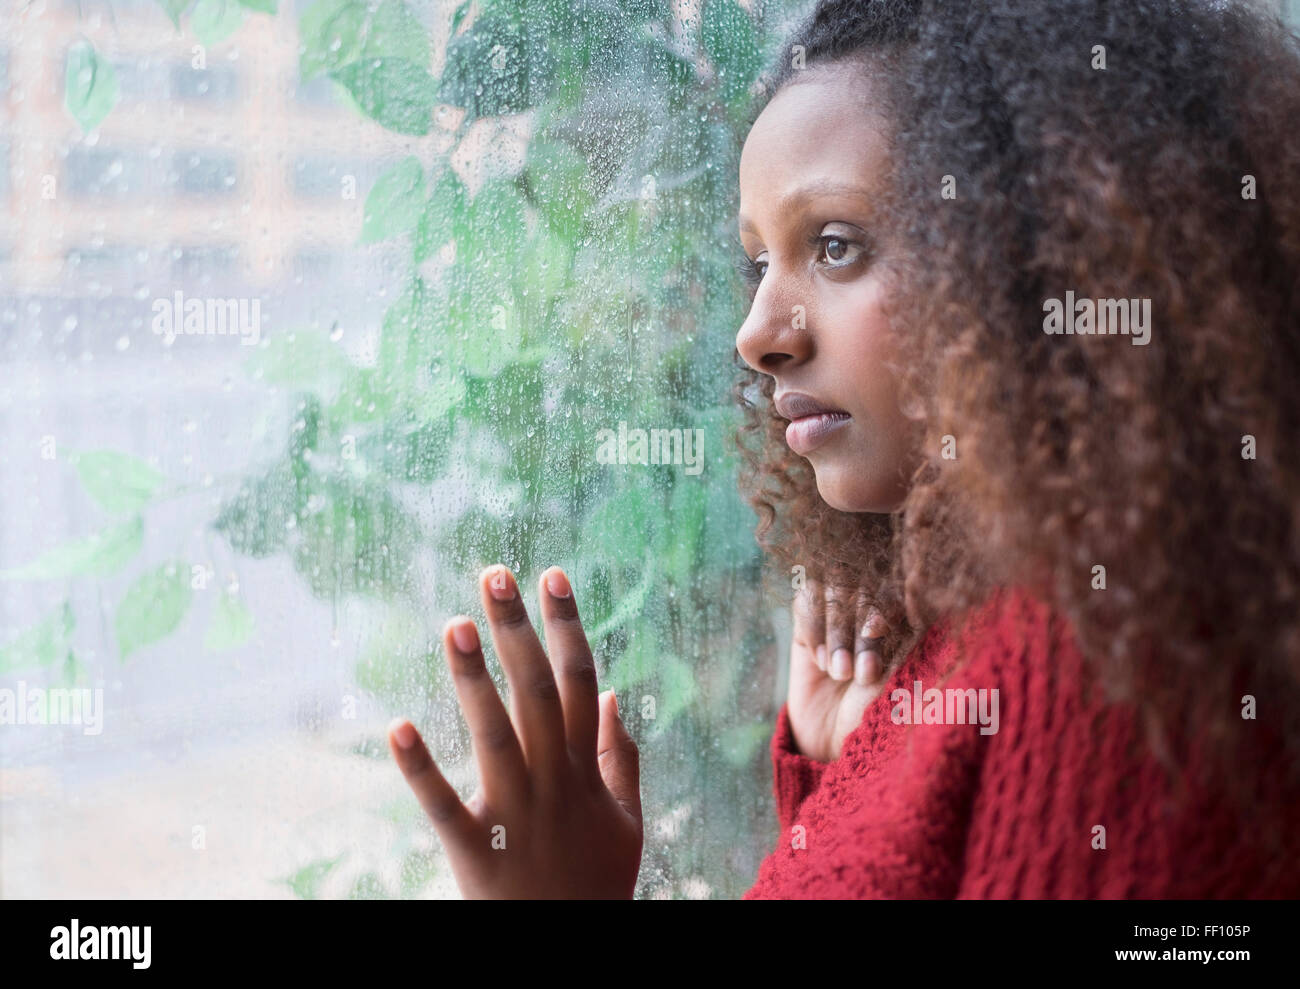 Black woman looking out rainy window Stock Photo